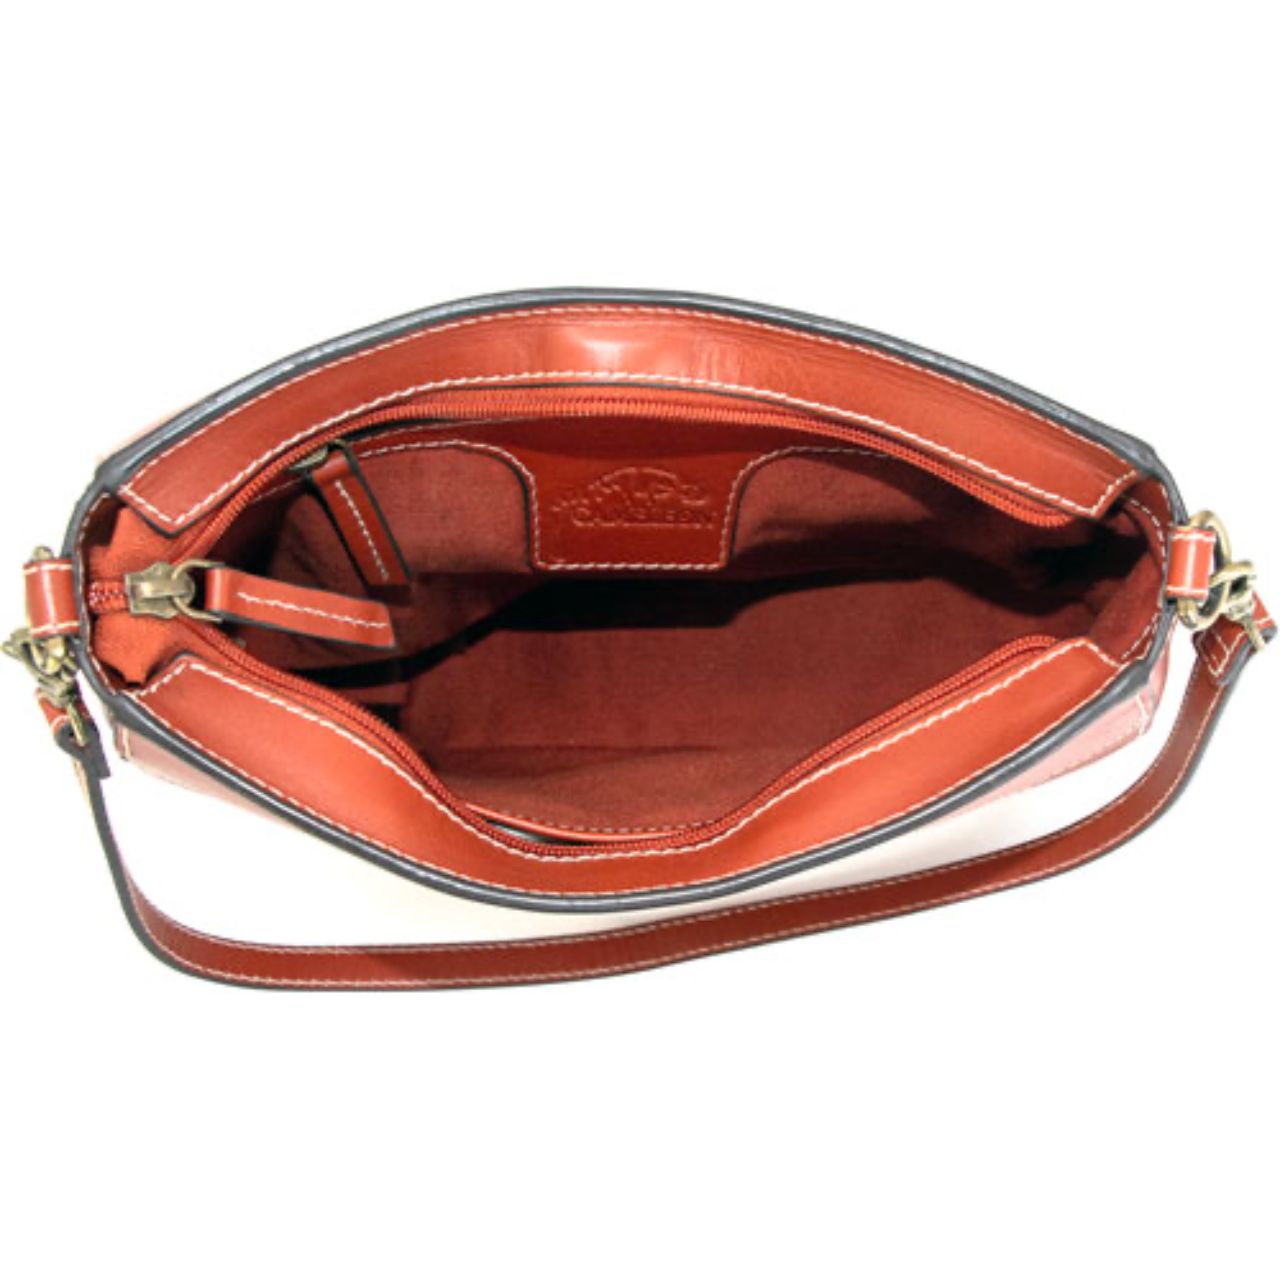 Interior of Cameleon "Saddle" concealed carry purse